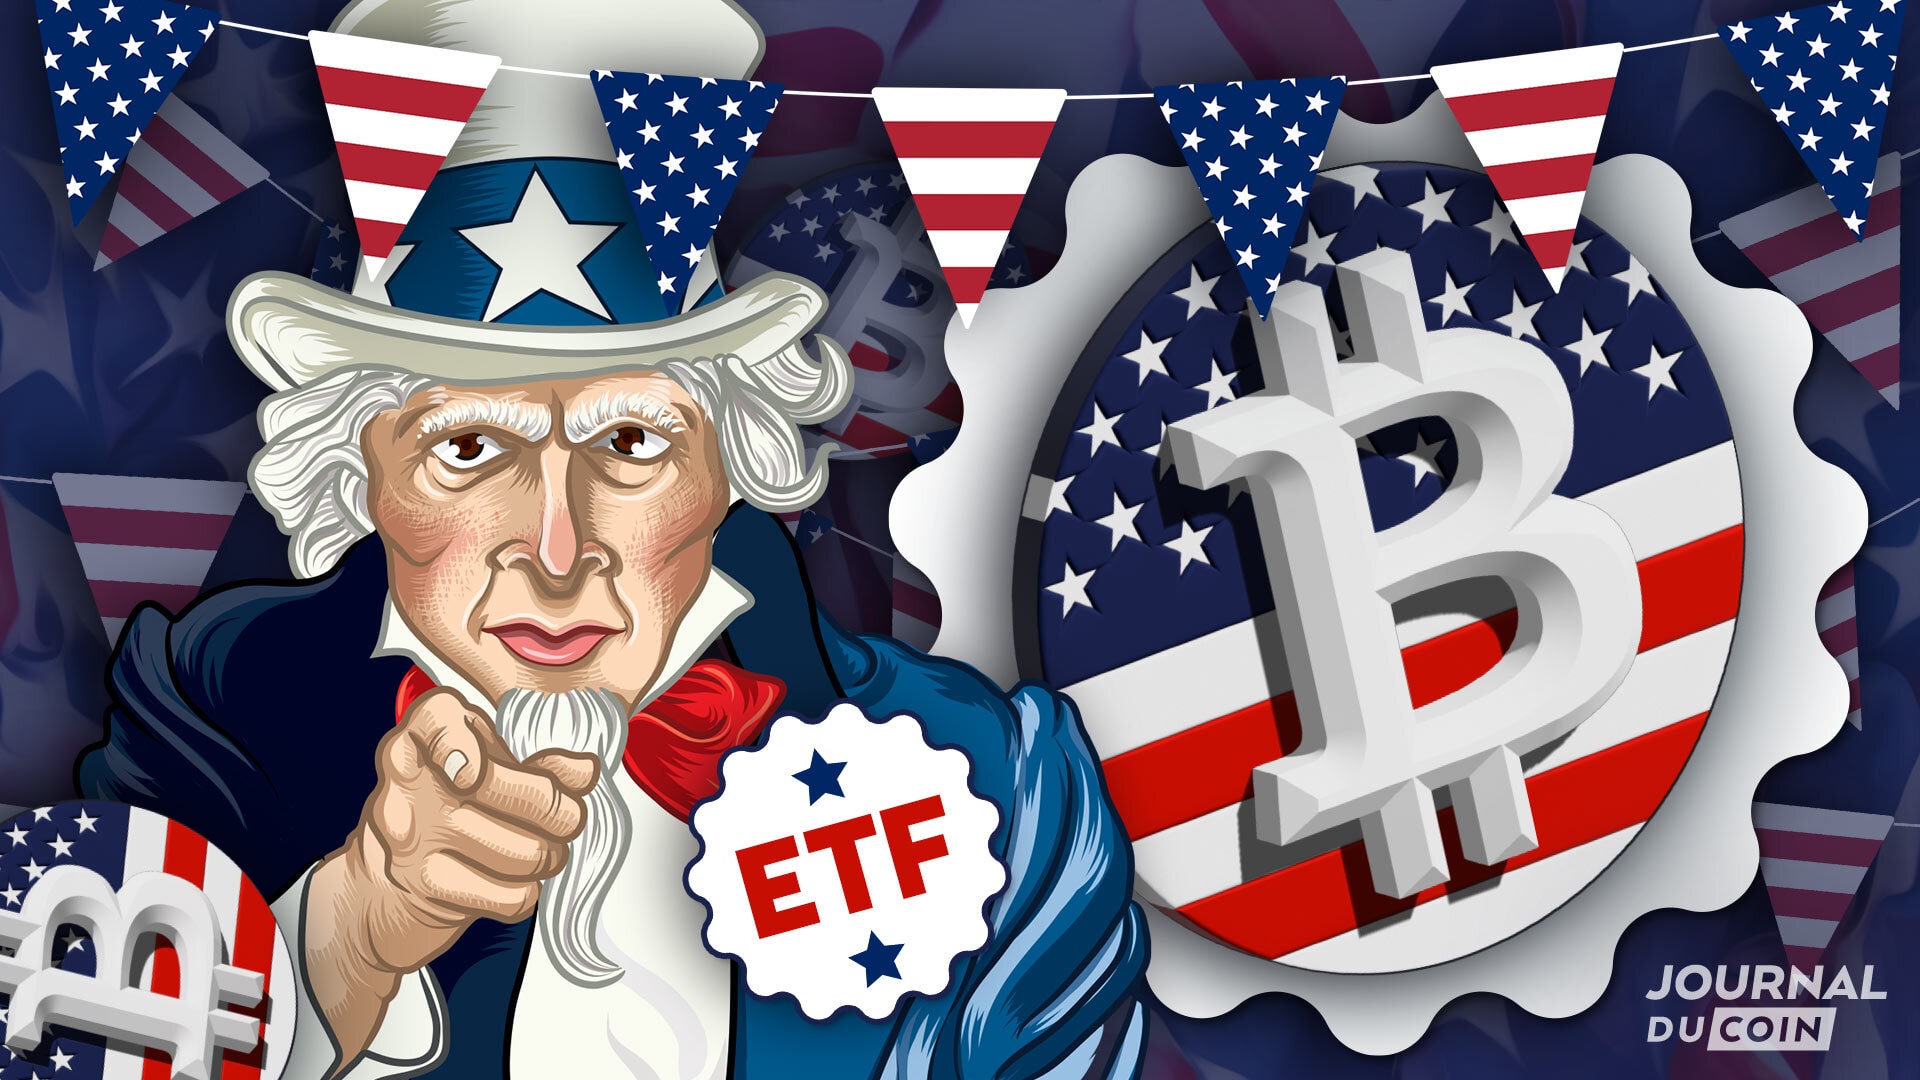 Bitcoin ETF approved by the SEC